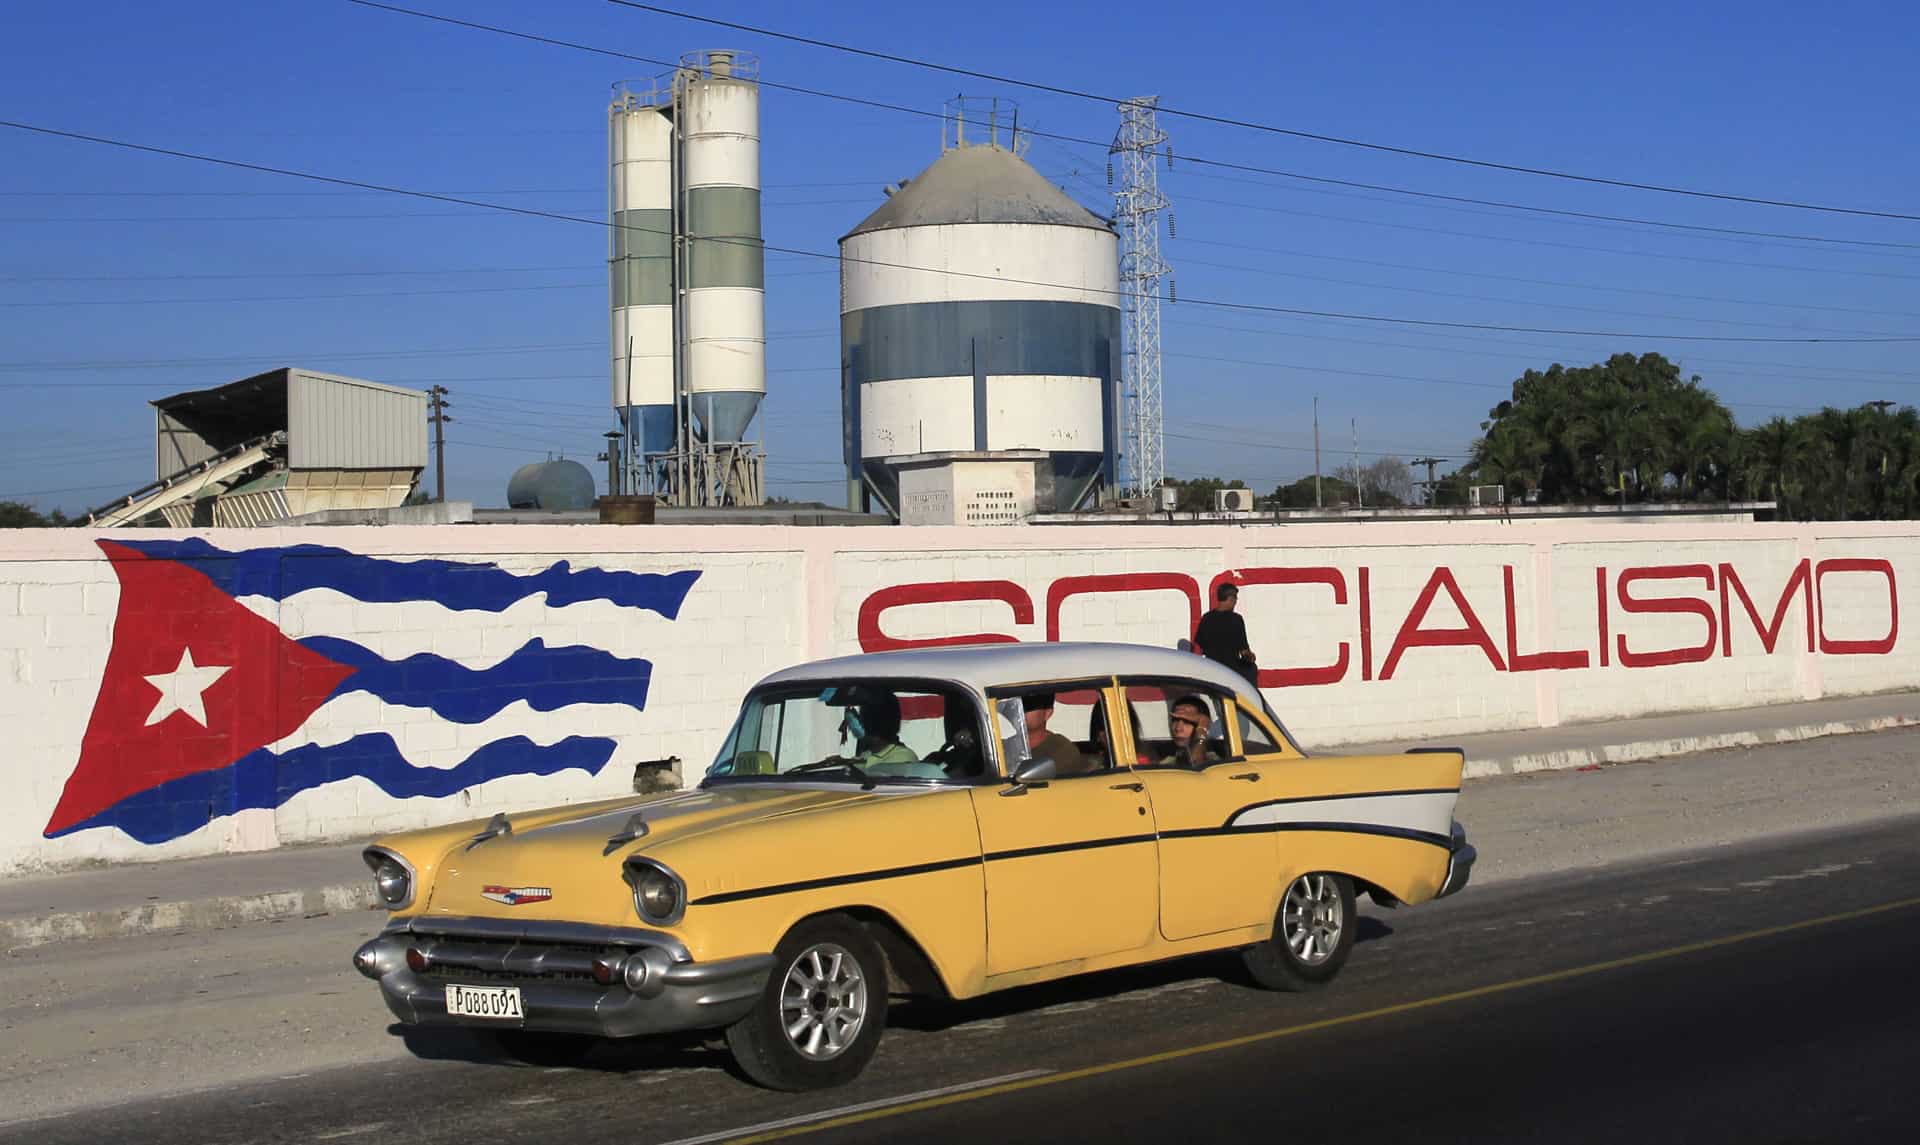 But why does Cuba have such an old car fleet?